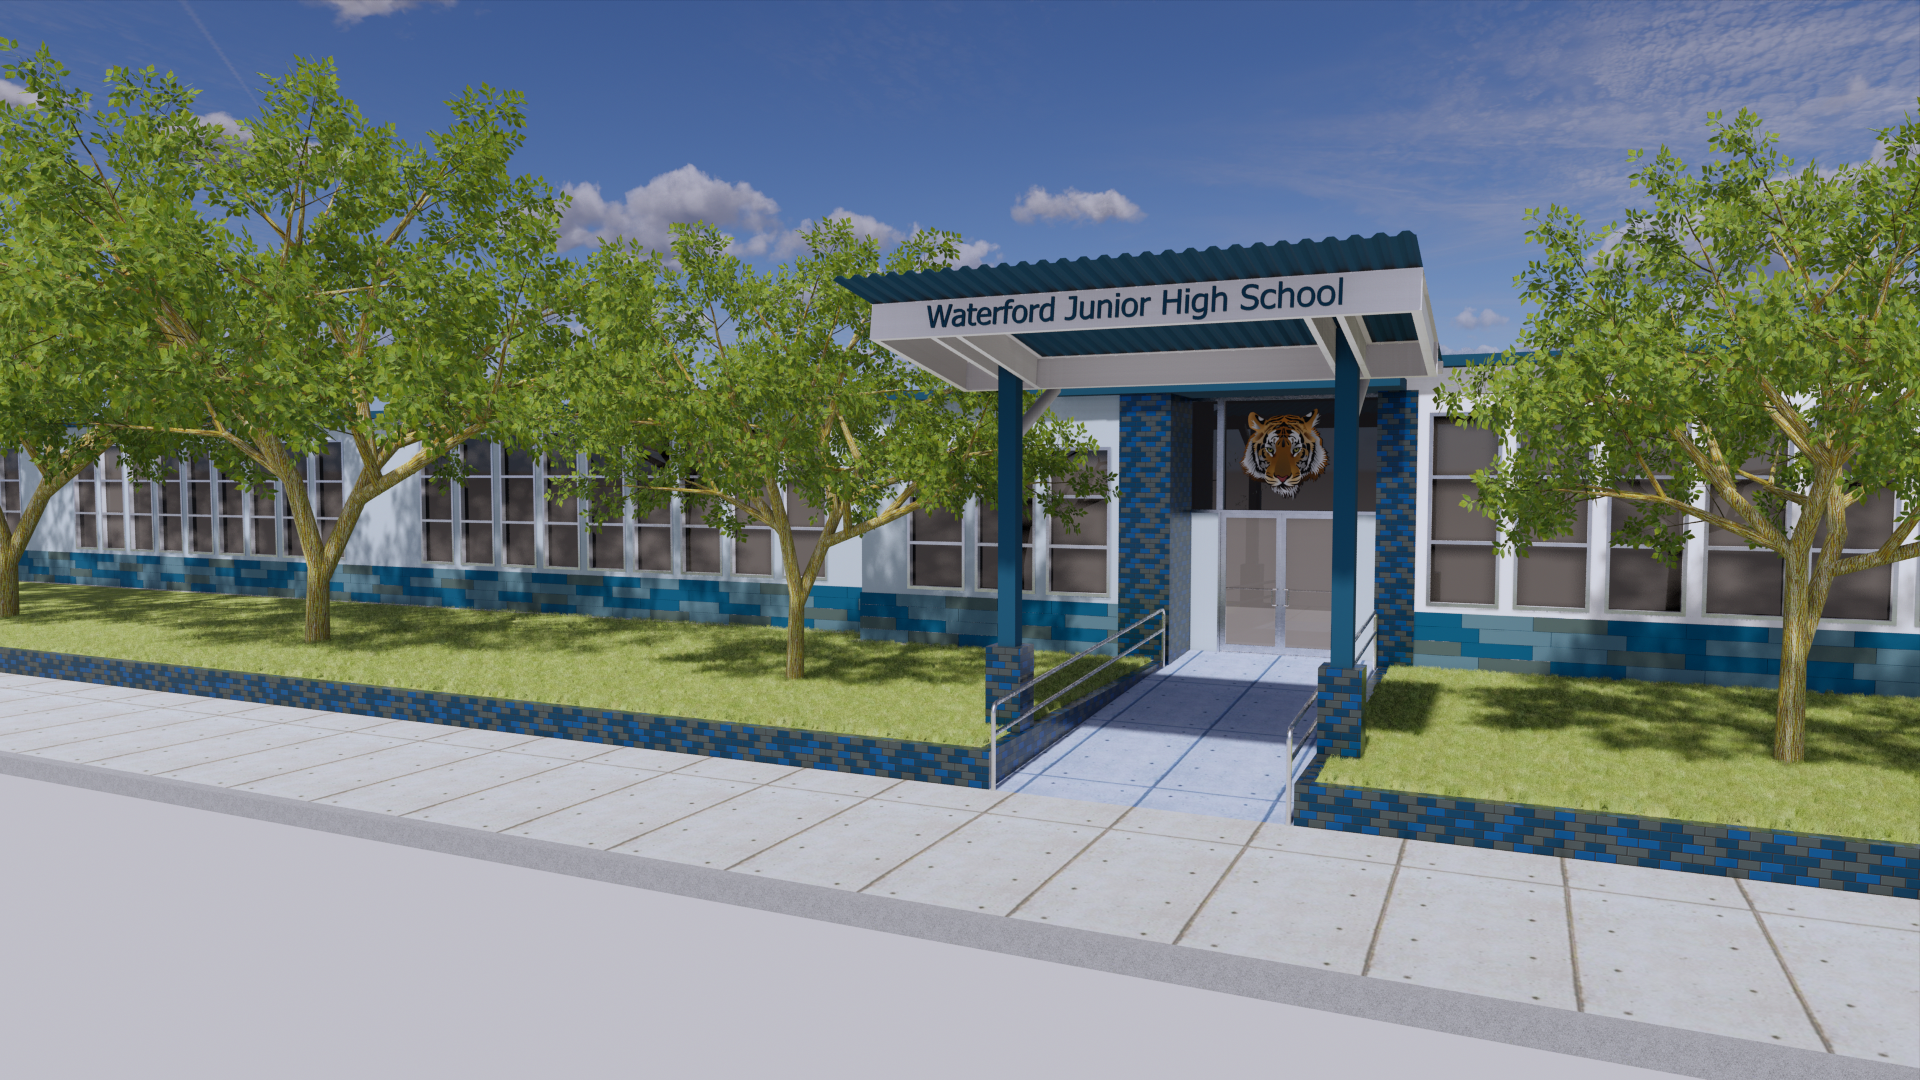 Render of Waterford Junior High School front facade, with tiled blue curb and wainscot